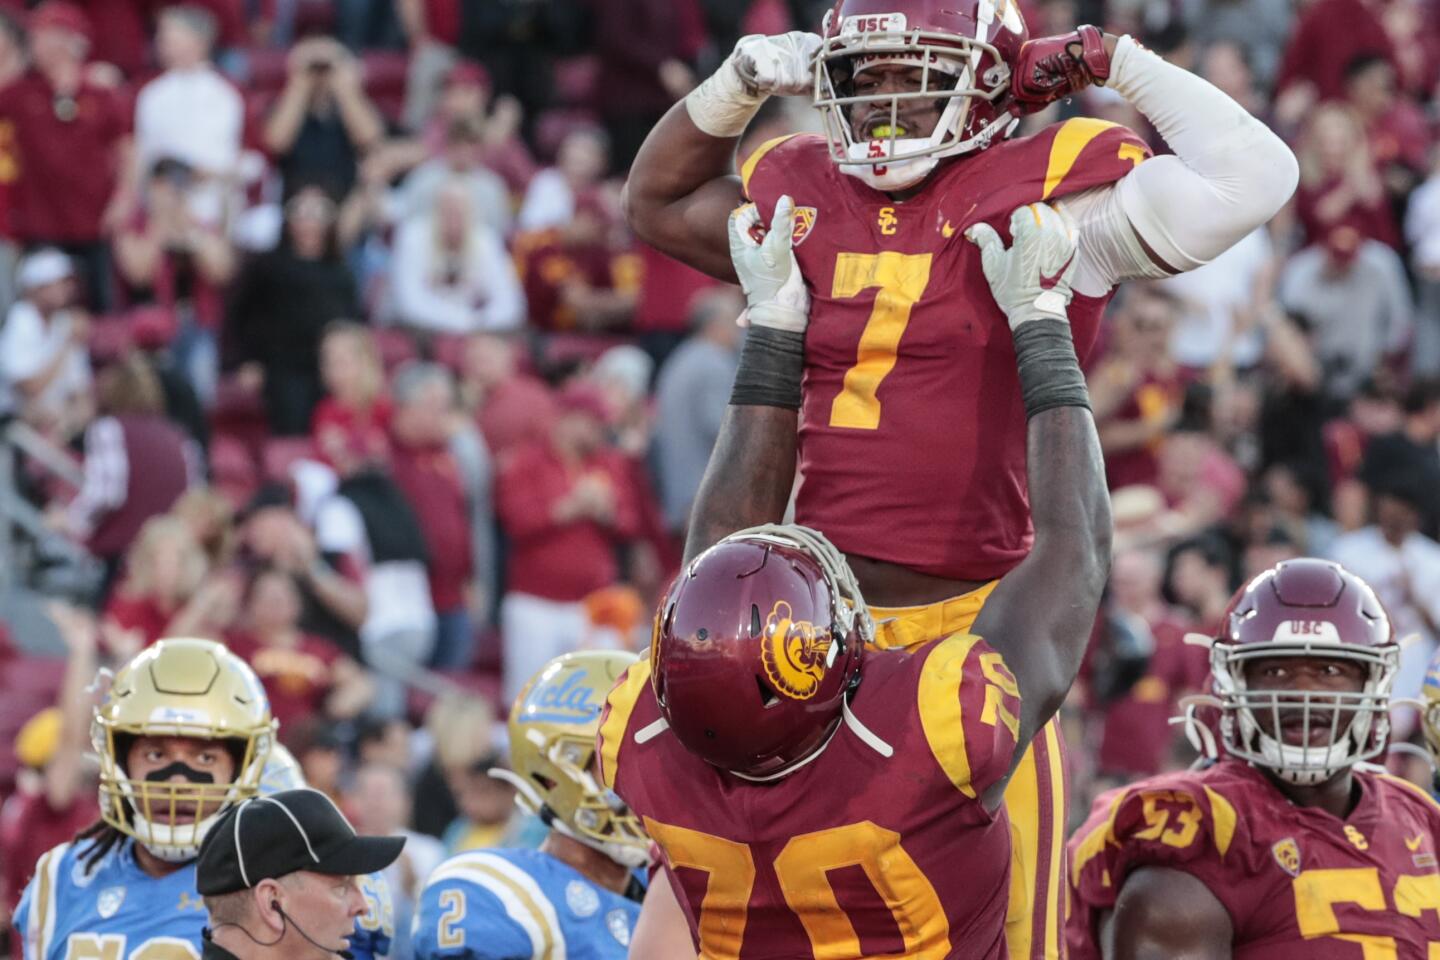 USC offensive tackle Jalen McKenzie (70) lifts running back Stephen Carr (7) after scoring a fourth quarter touchdown at the Coliseum on Saturday.